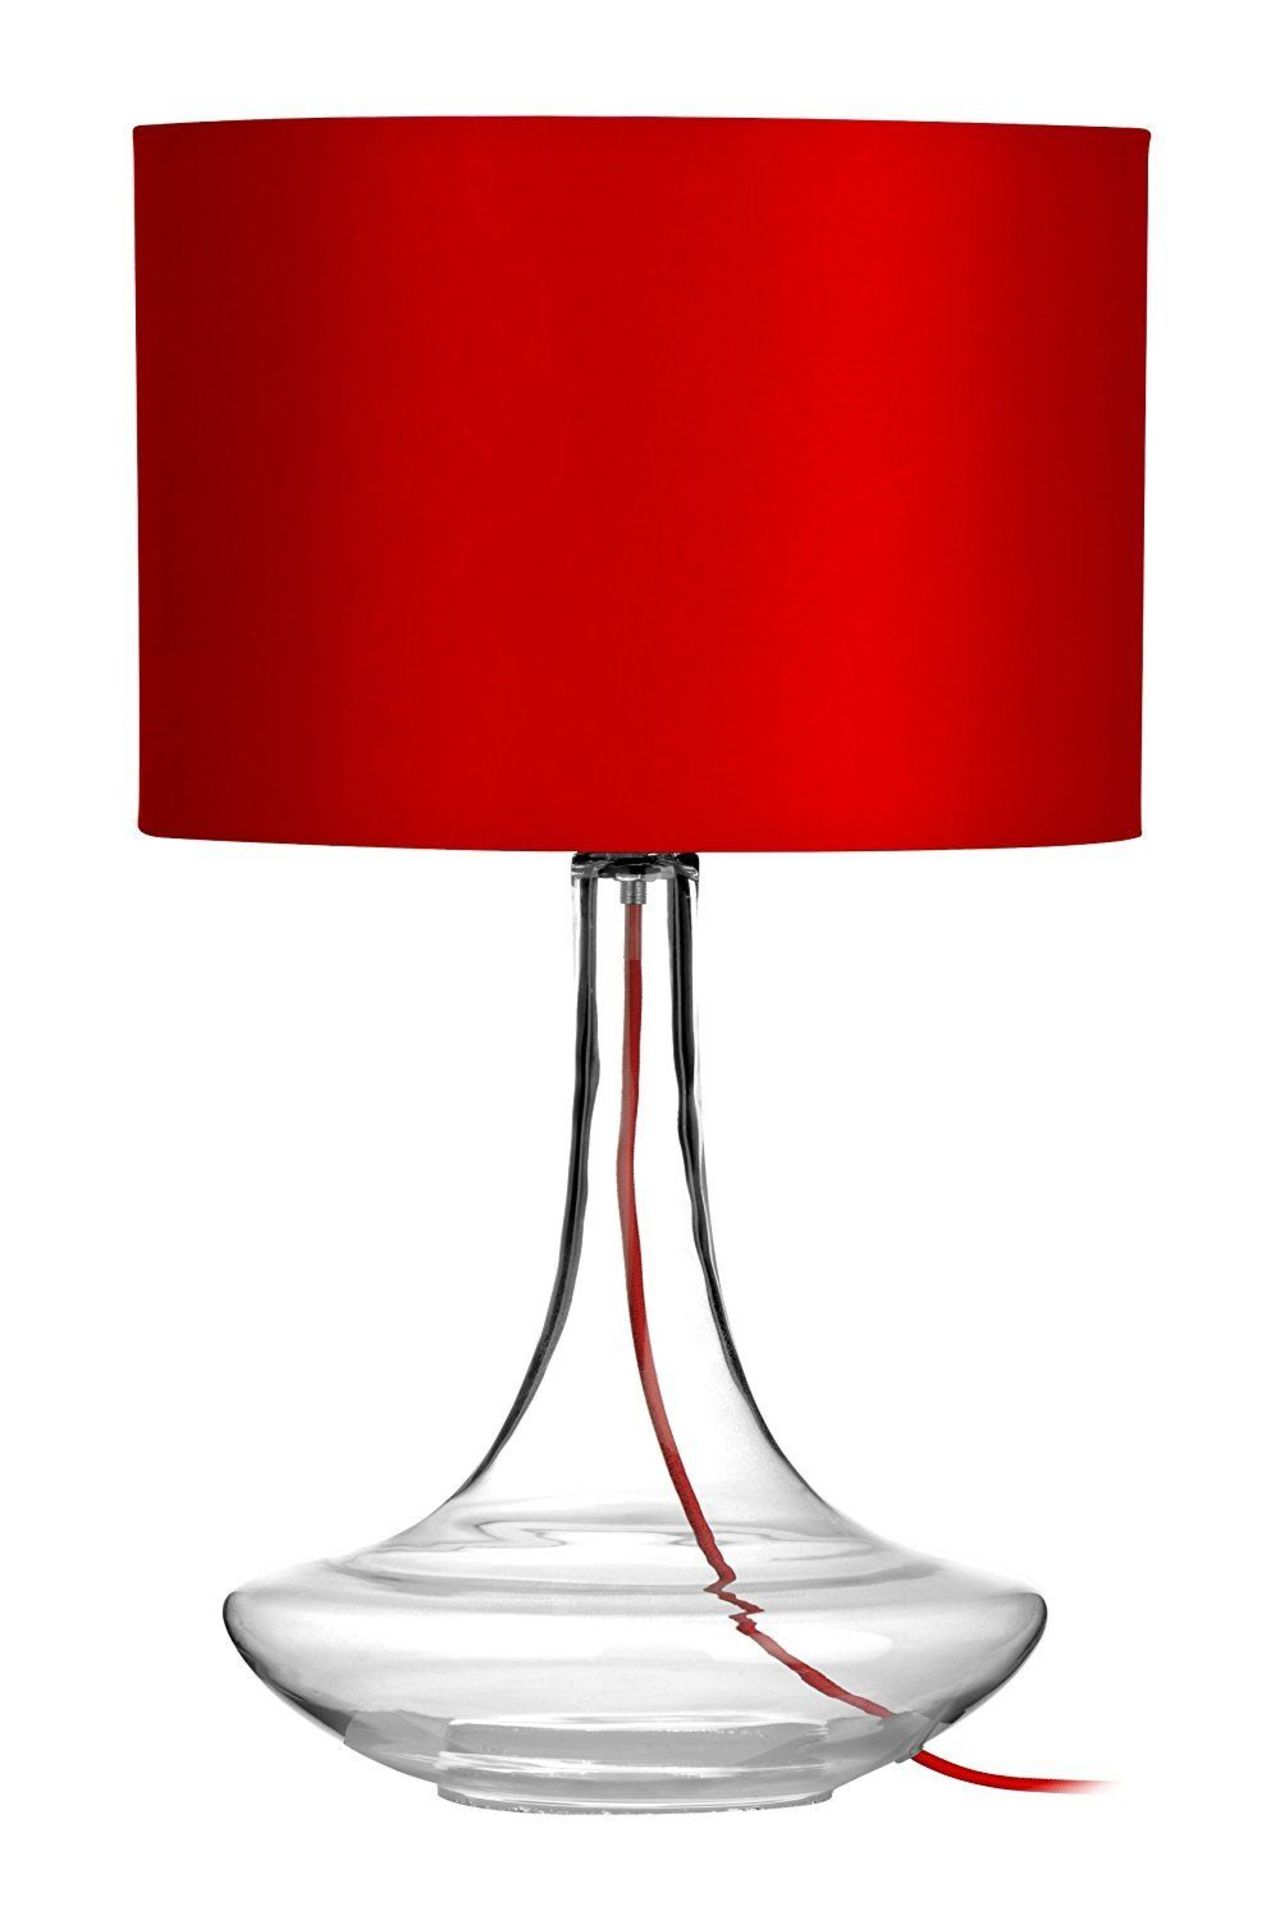 Premier Housewares Curved Glass Table Lamp - Red